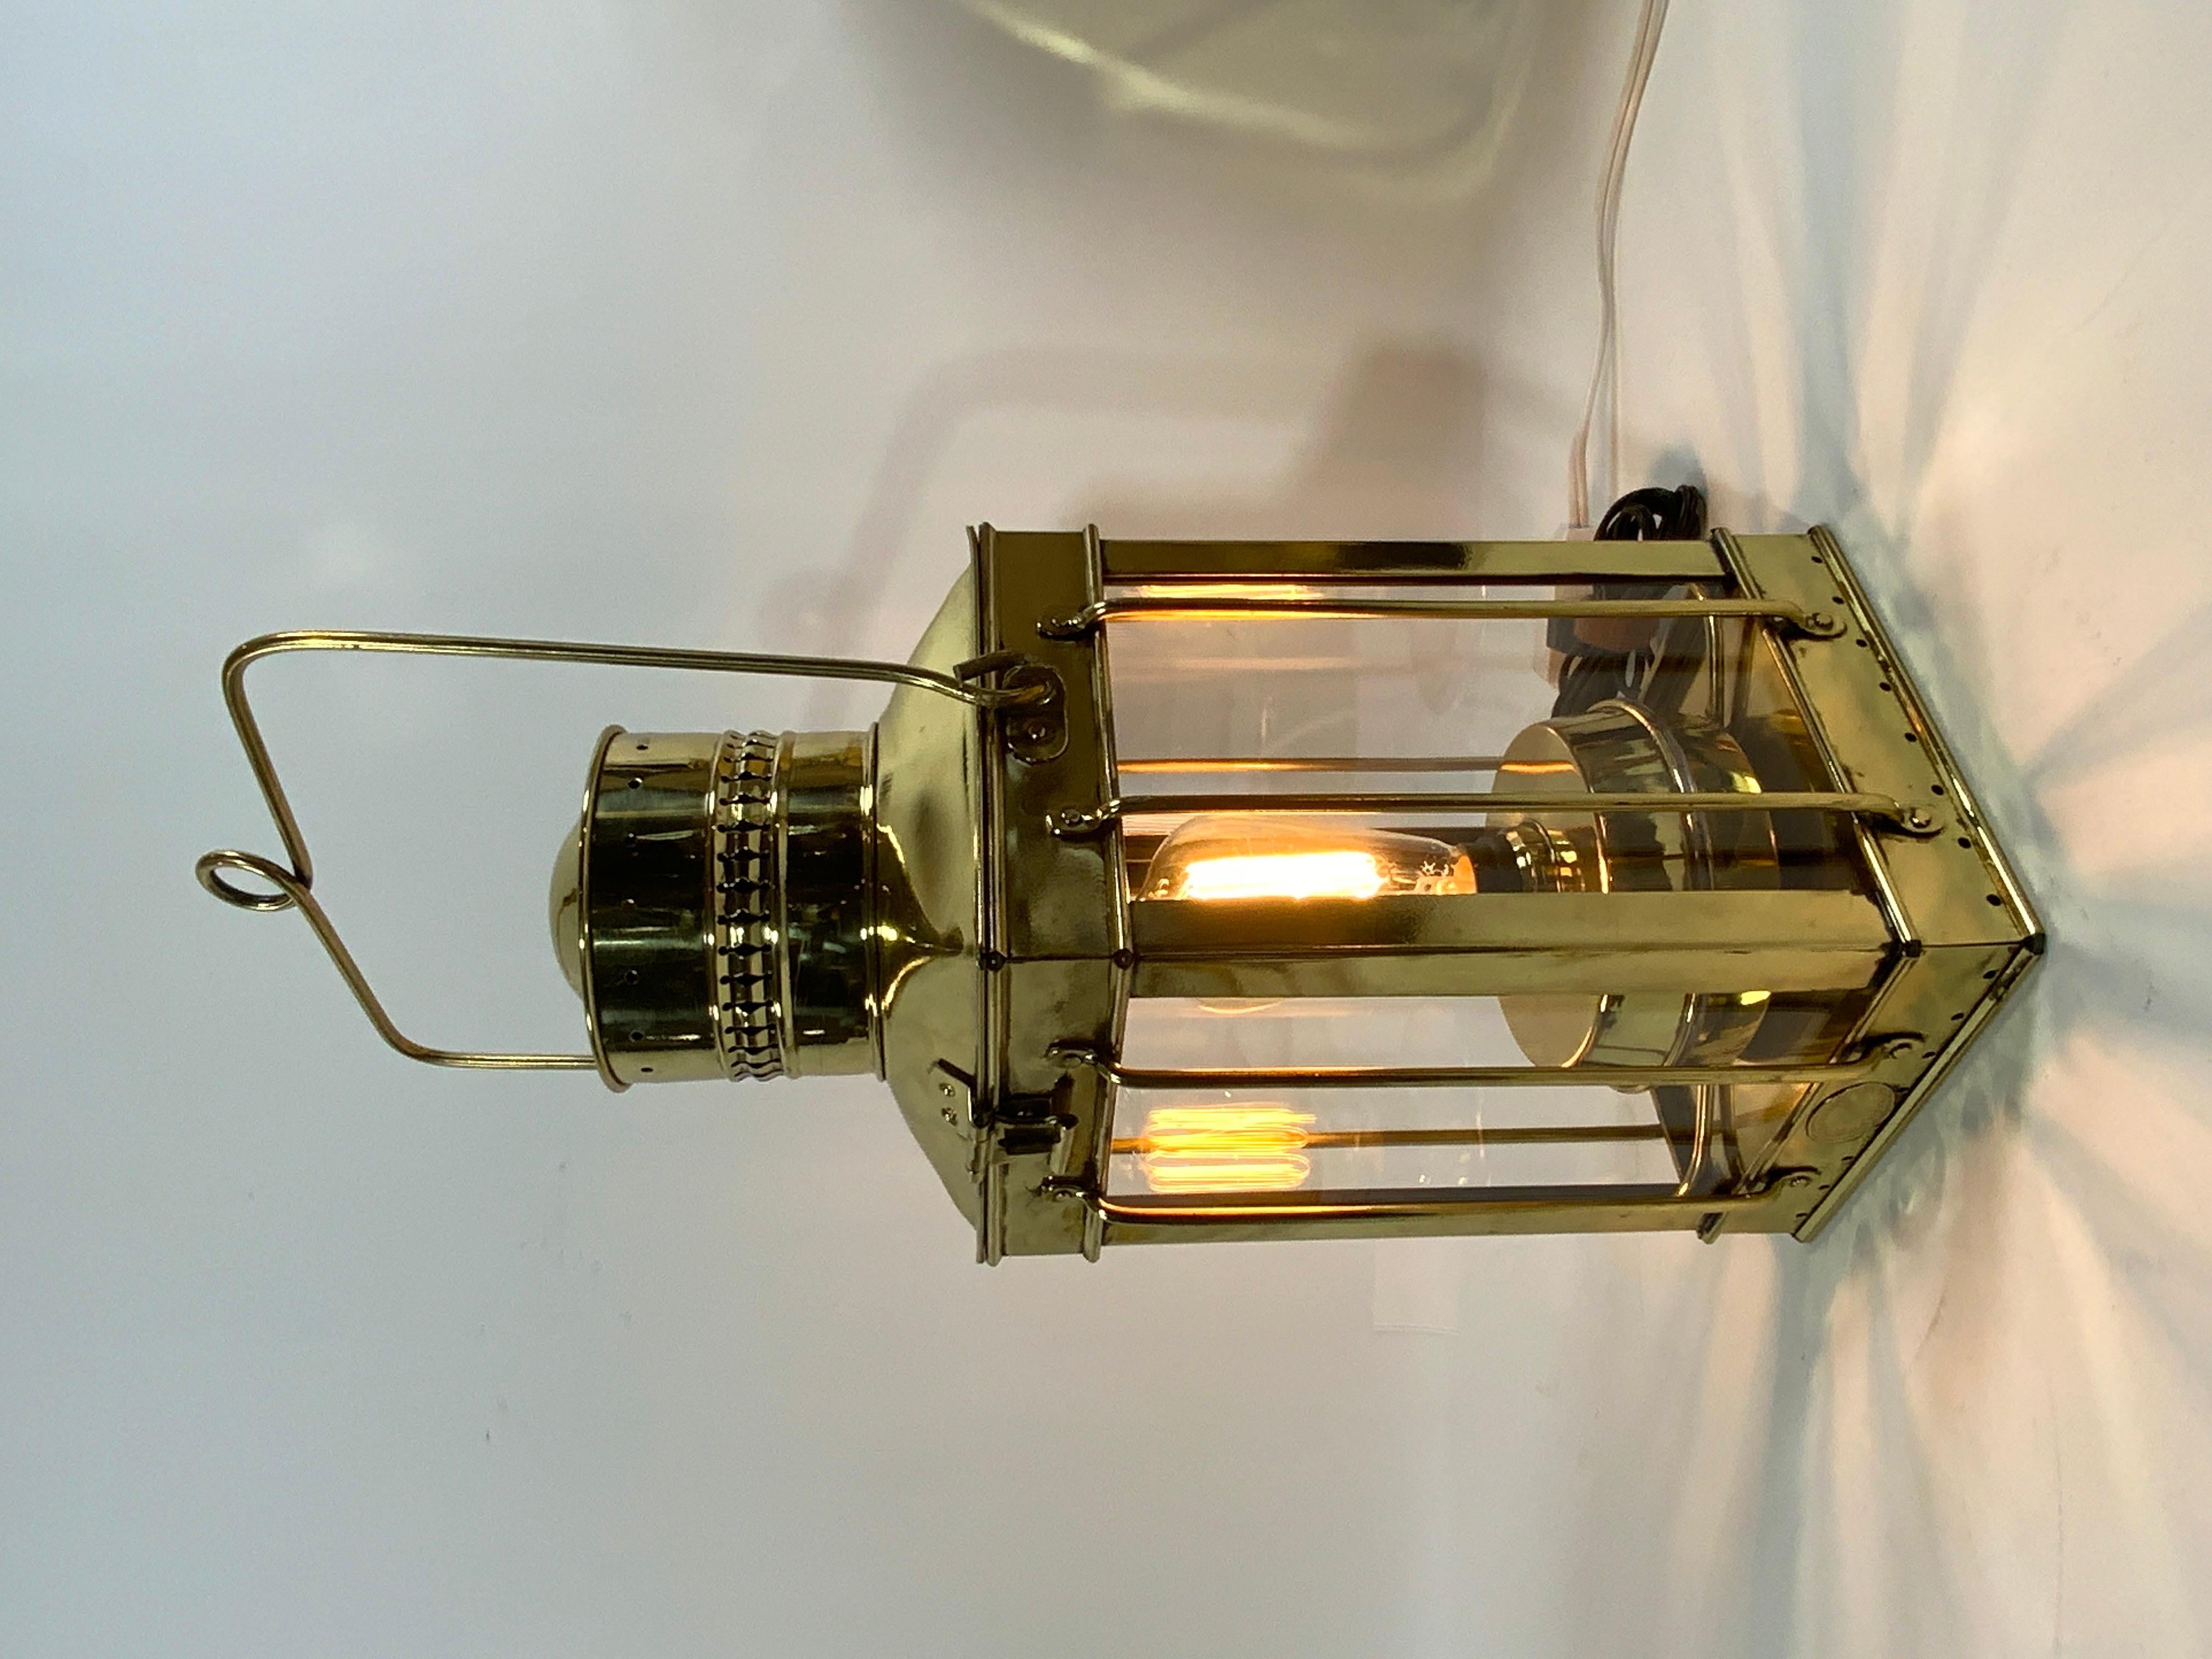 Highly polished and lacquered English ships lantern of brass. Meticulously polished and lacquered. Oil tank has been retrofitted with a led bulb and wire. Four glass panes and protective brass bars. Vented chimney. Hoisting handle Circa 1920. In the